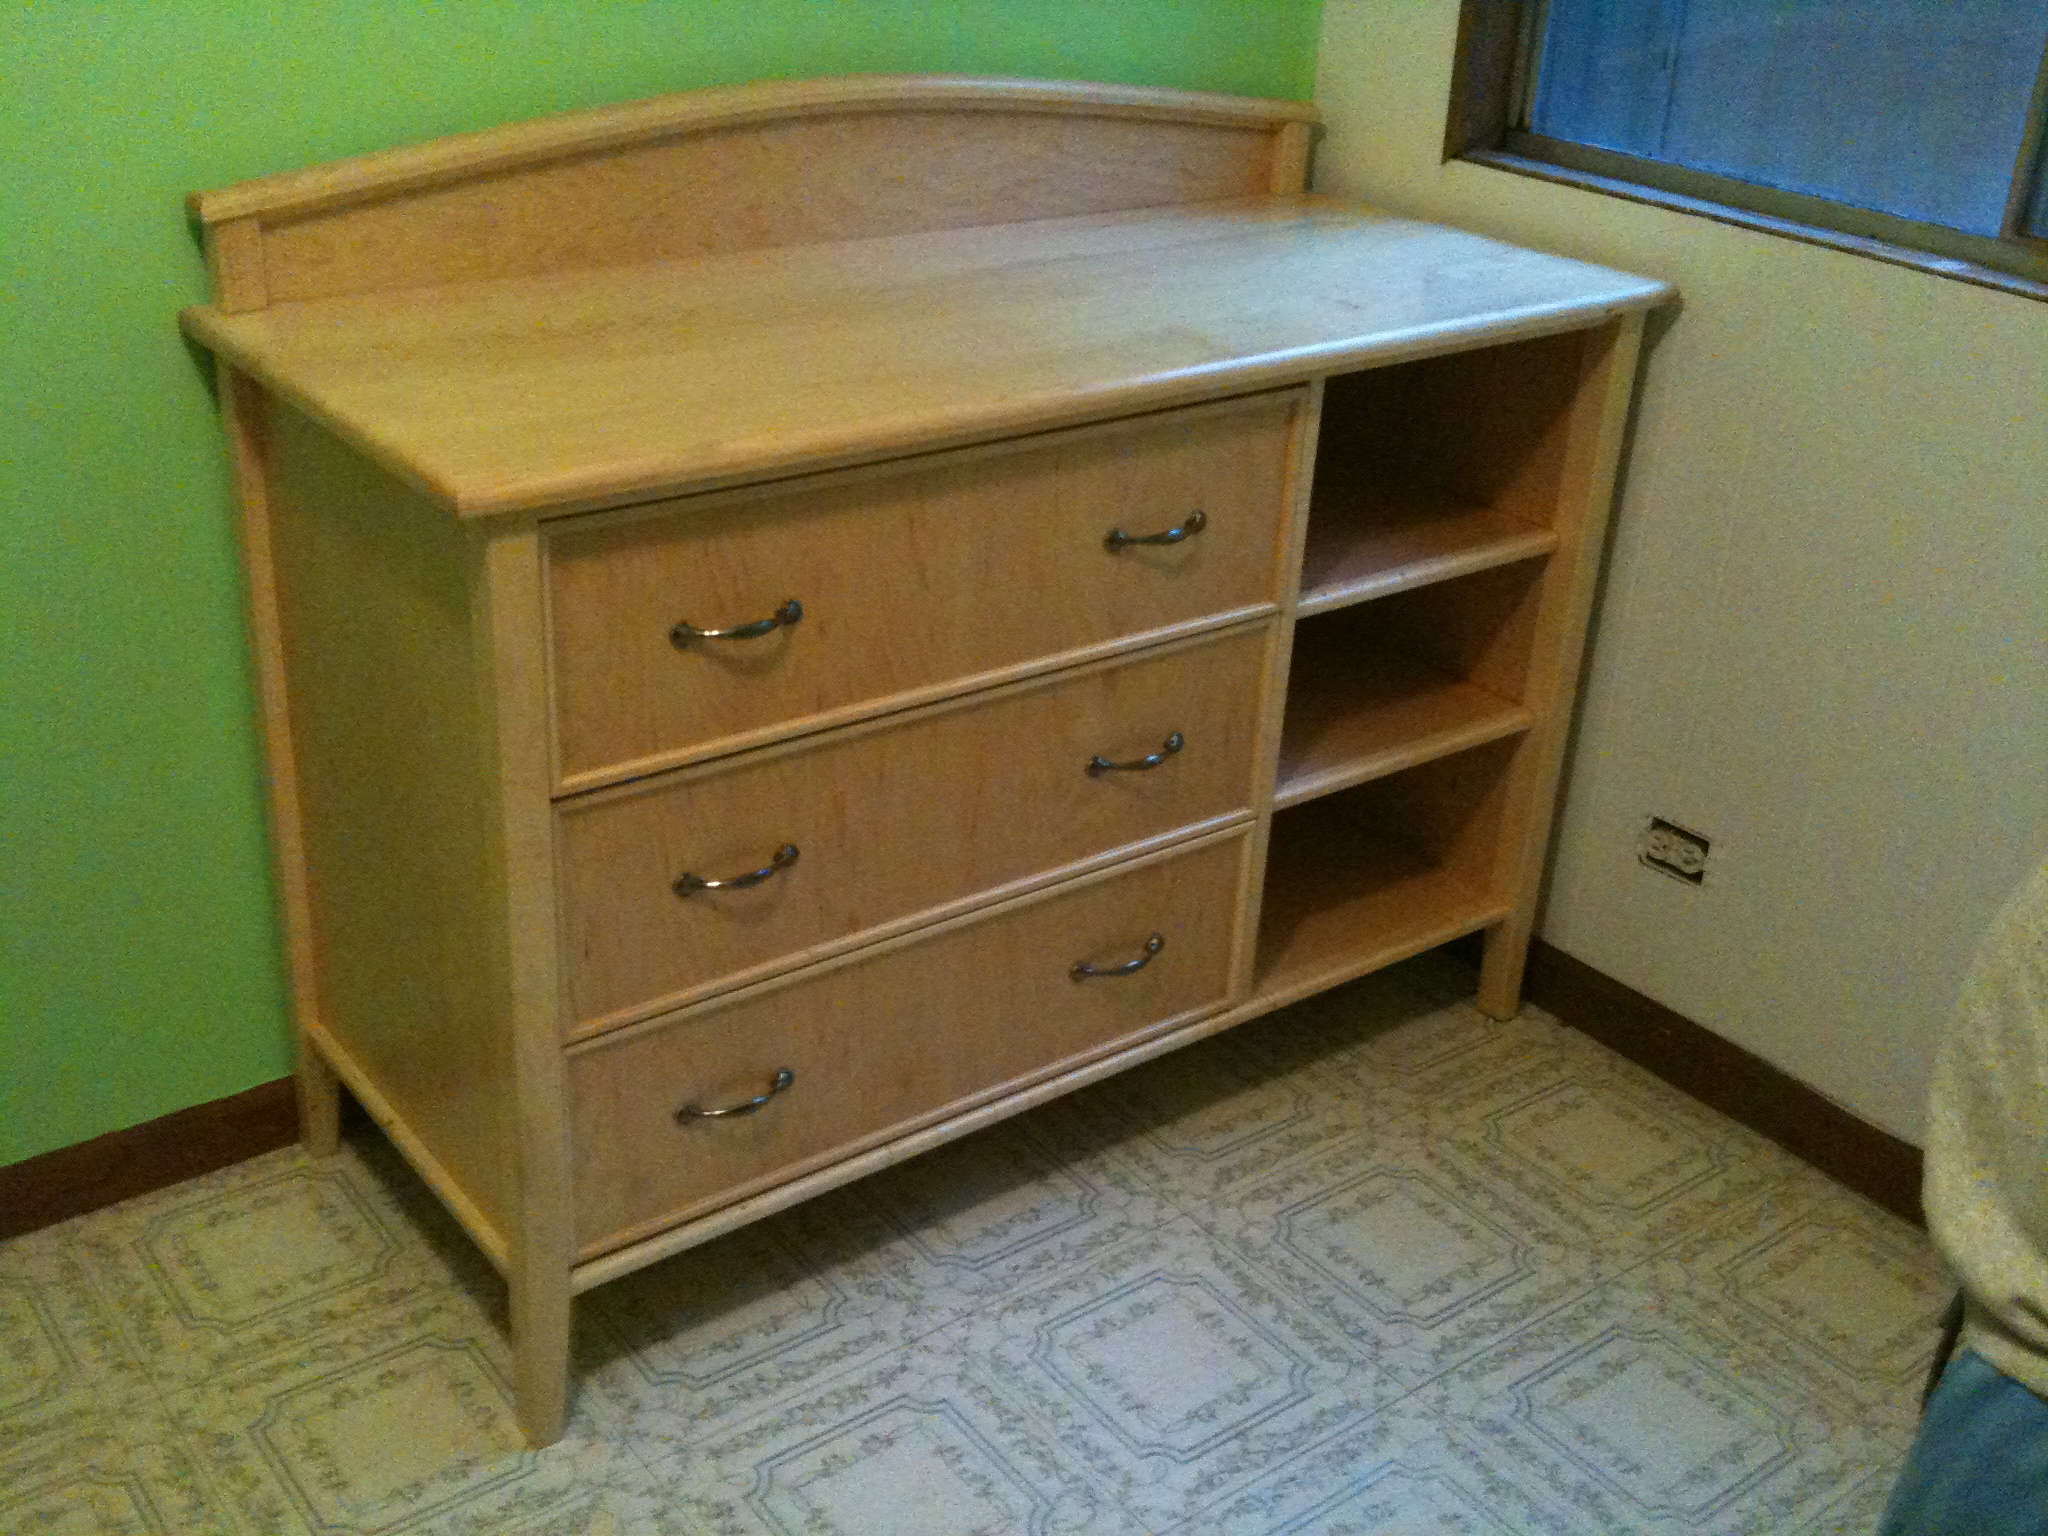 Recent projects: changing table/dresser and baby bed â€